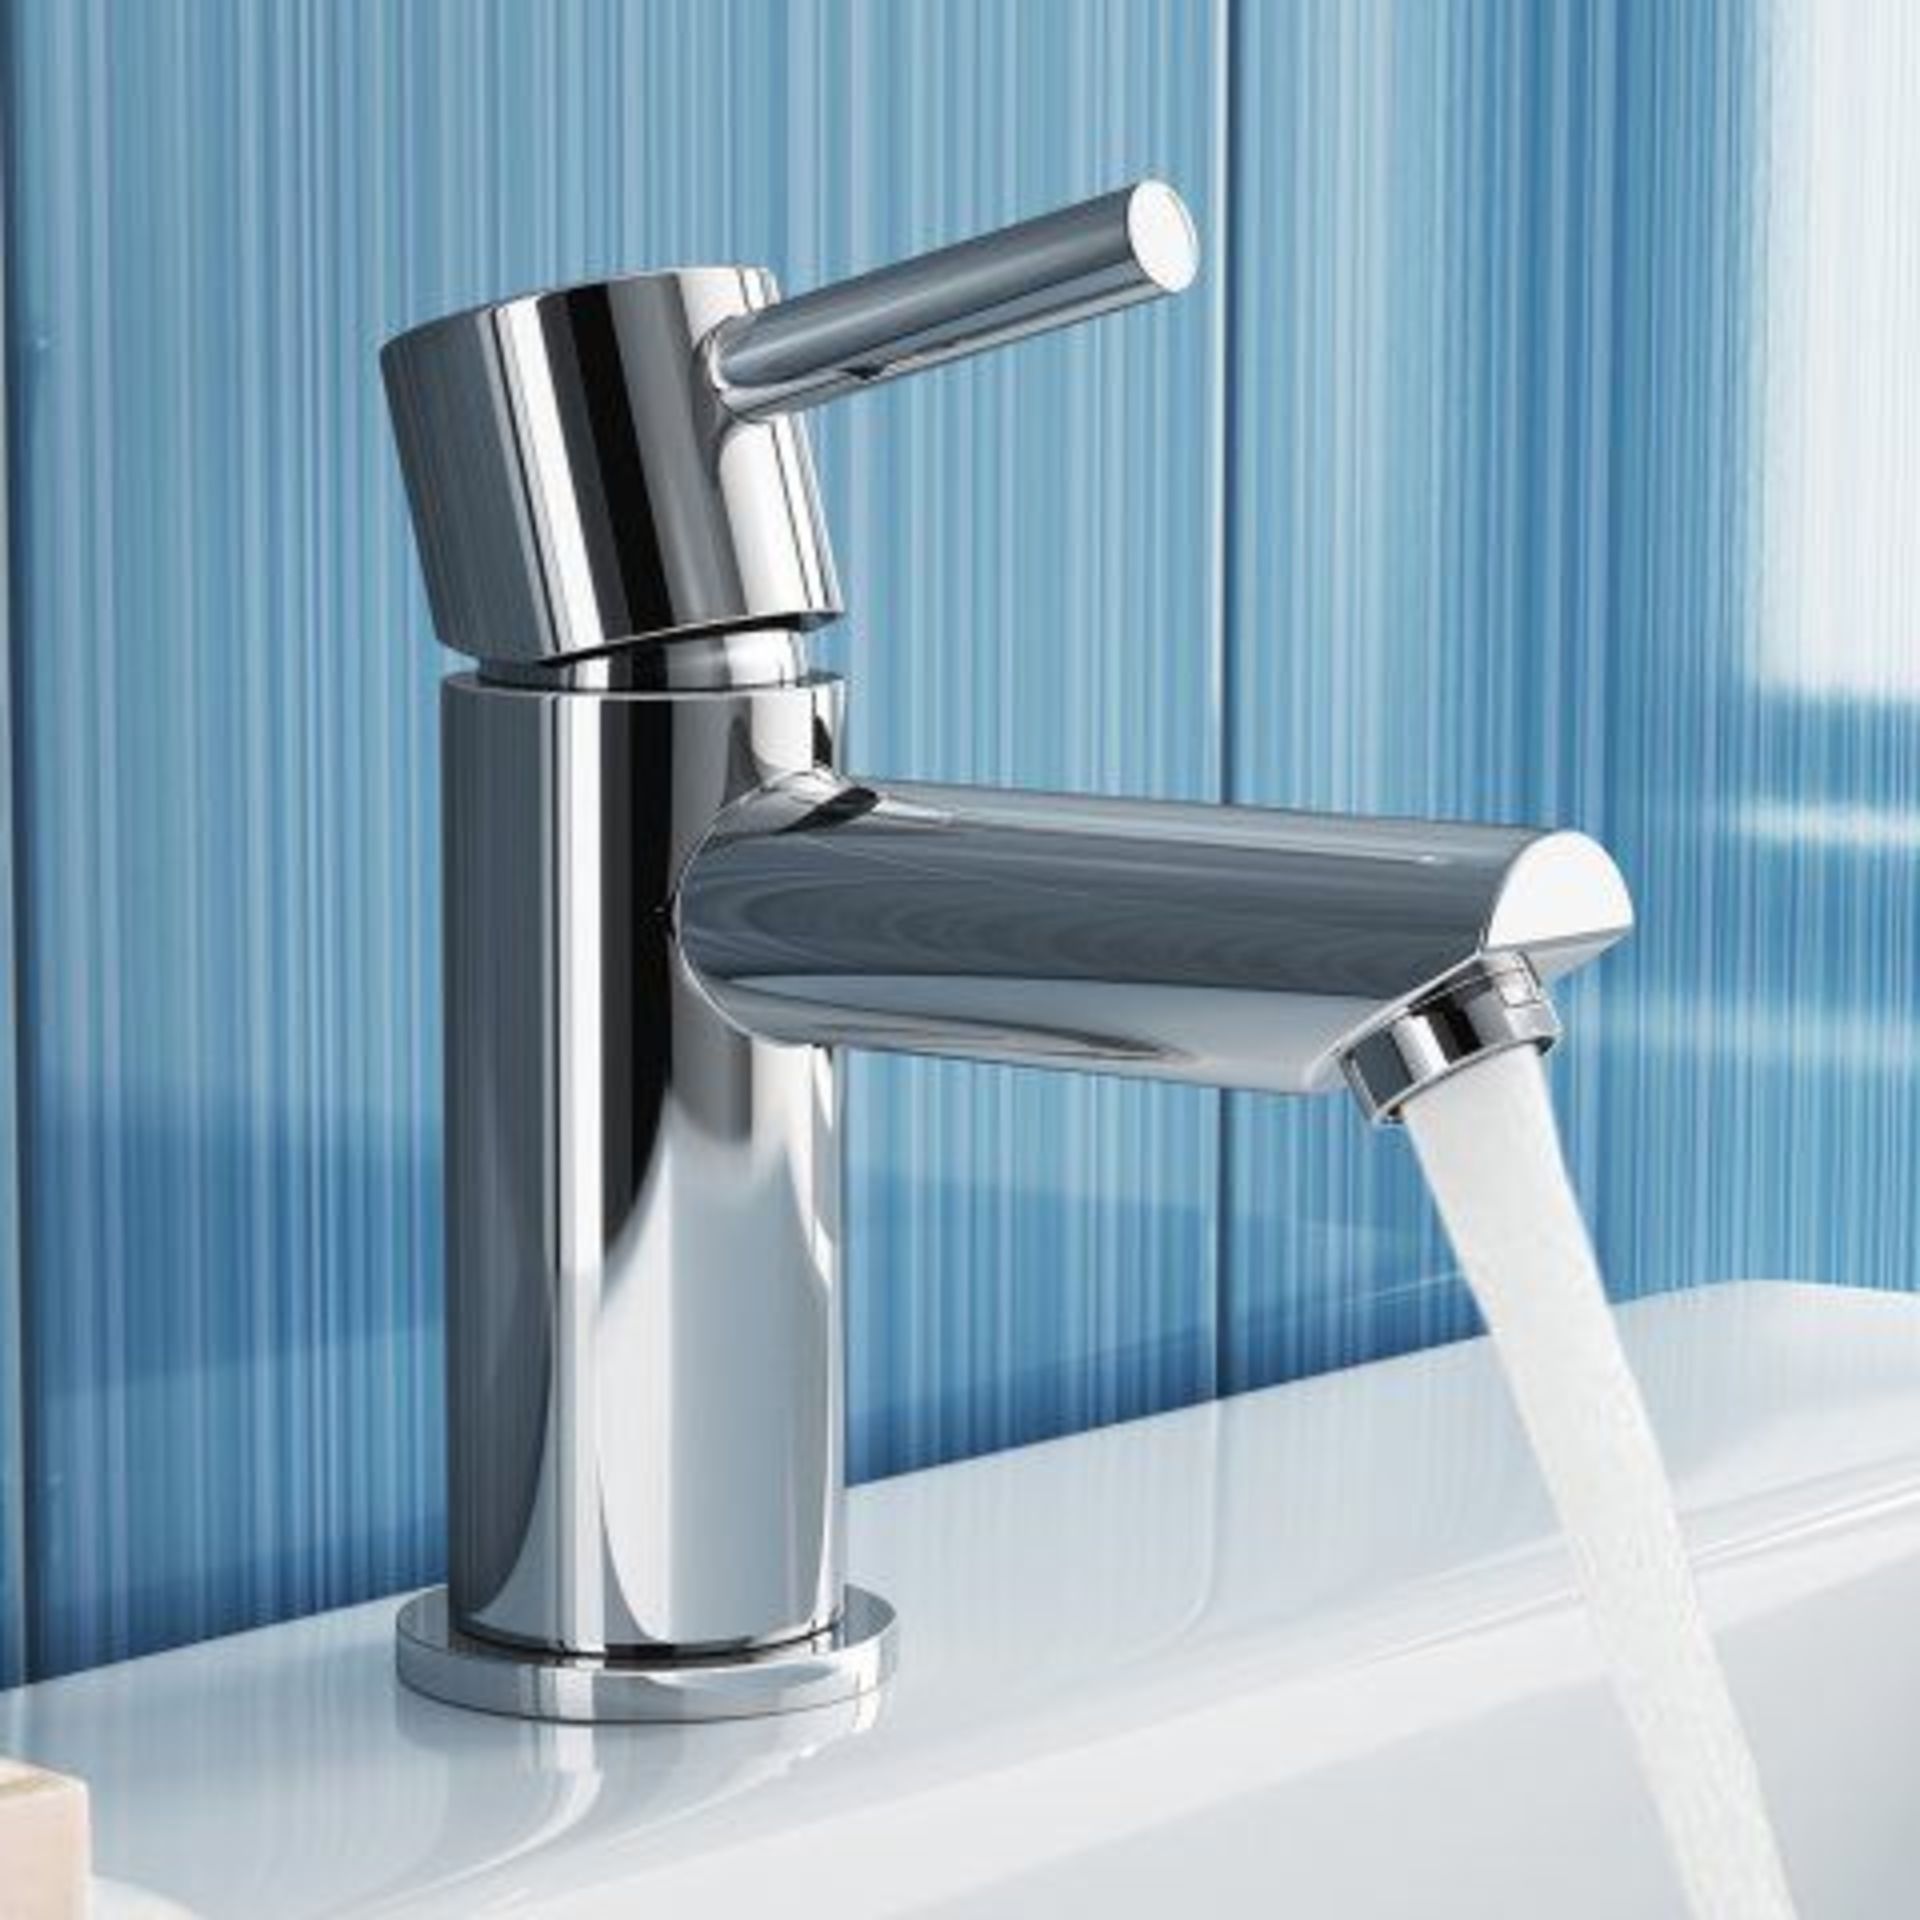 New & Boxed Gladstone Basin Mixer Tap. Tb2013. Chrome Plated Solid Brass Mirror Finish Simple I...